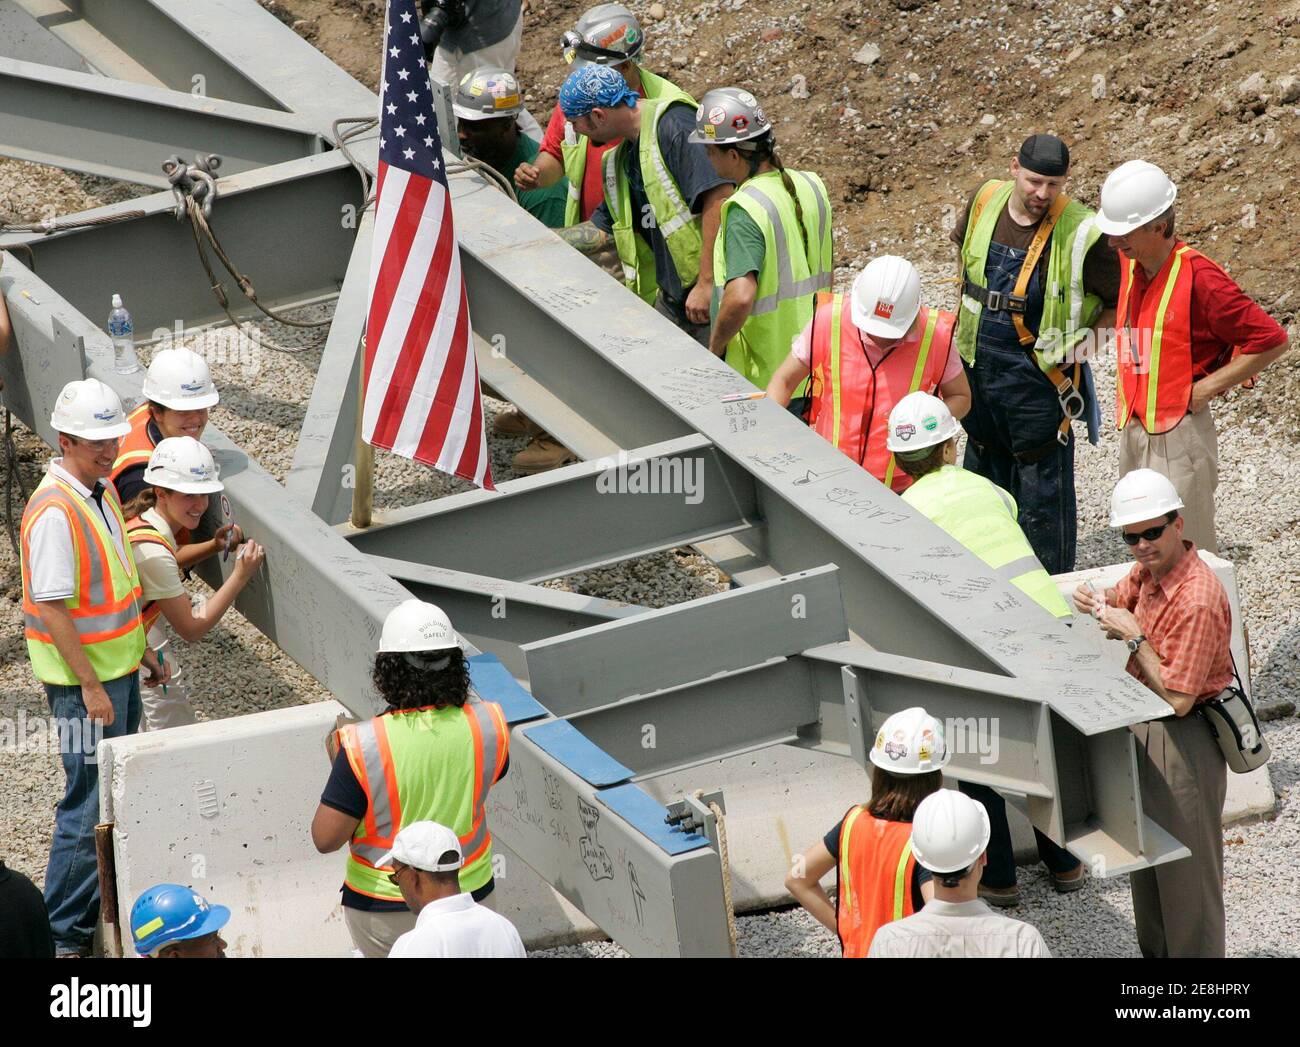 Construction and various team personnel sign a steel girder inside the new Washington Nationals baseball stadium, Nationals Park, on July 11, 2007. The stadium will open next season in April 2008.     REUTERS/Gary Cameron   (UNITED STATES) REUTERS Stock Photo